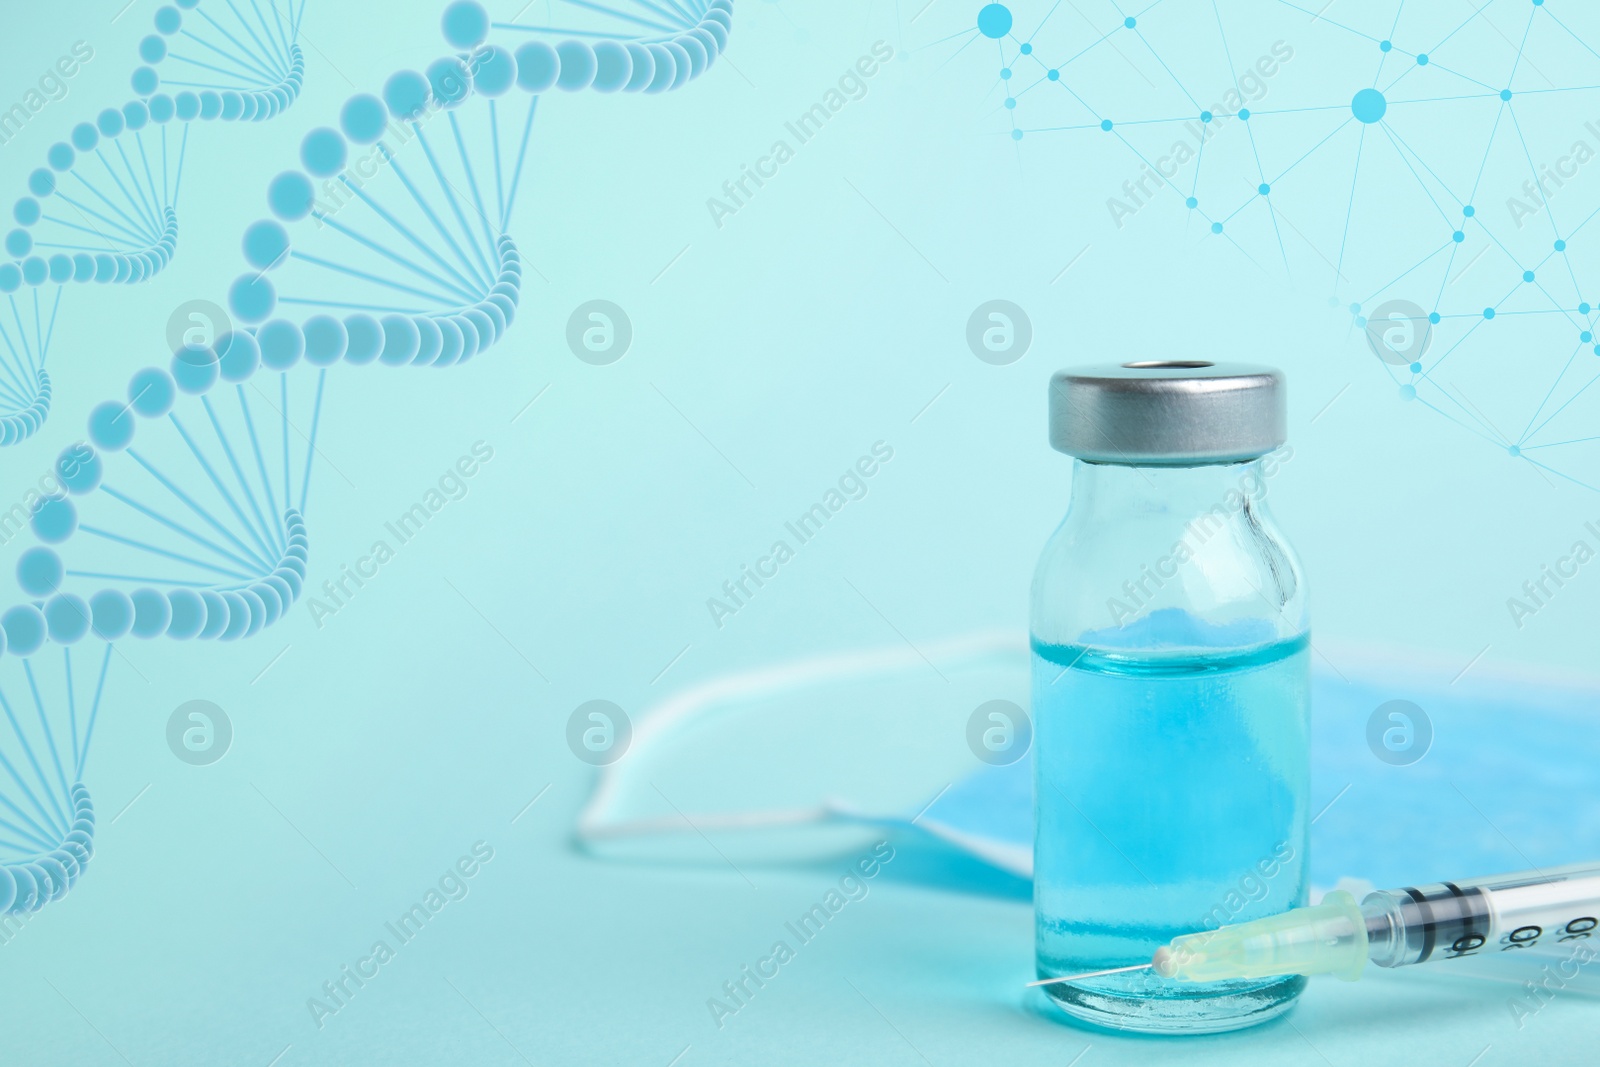 Image of Vial with vaccine, syringe and mask on turquoise background. Covid-19 prevention